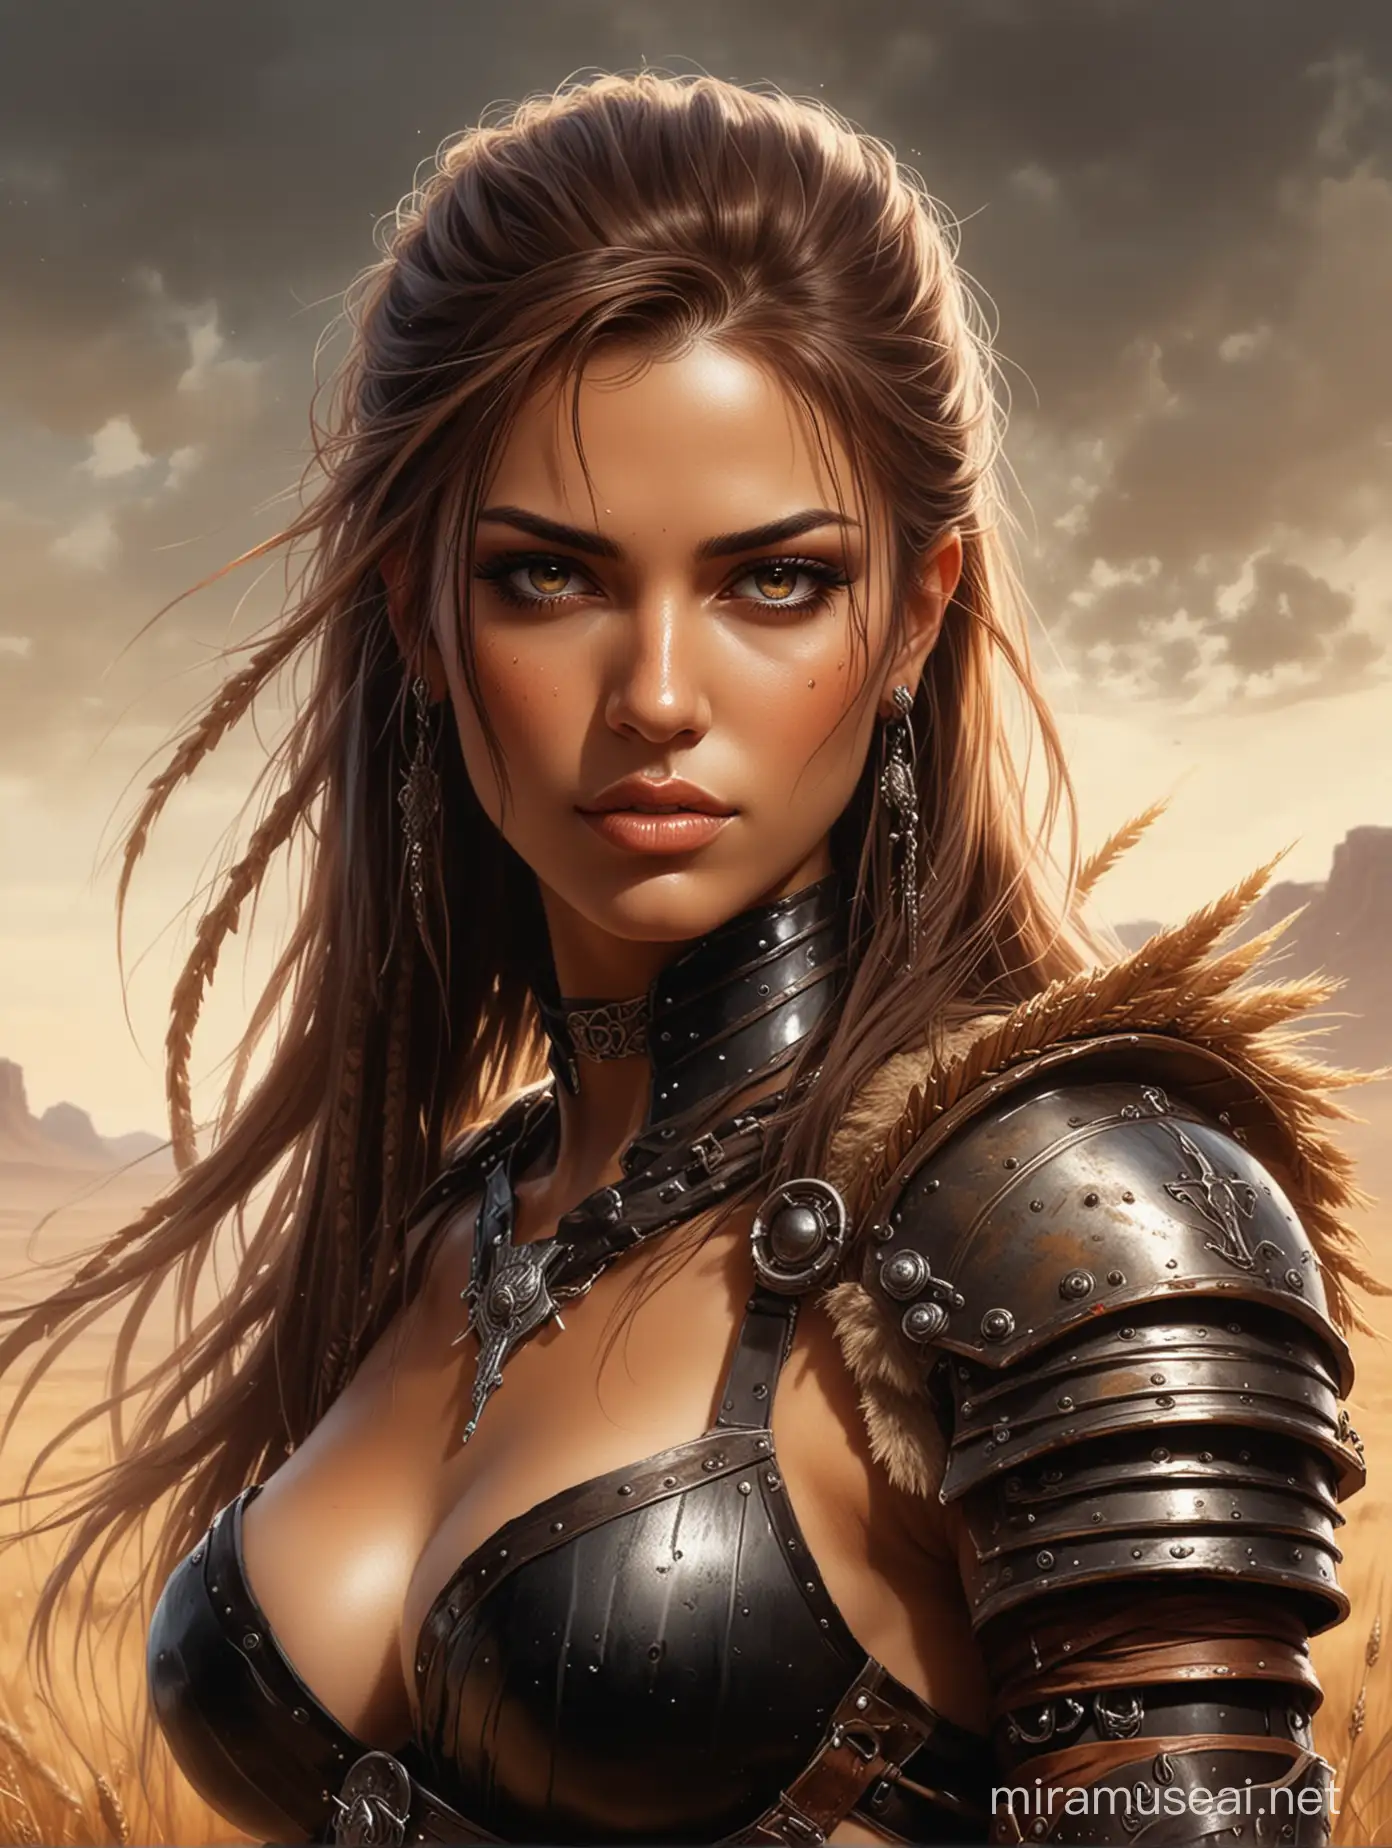 wide-angle portrait painting of . Style of Luis Royo inspired fantasy female warrior art. black, tan, wheat, rosybrown colors. 8K HD